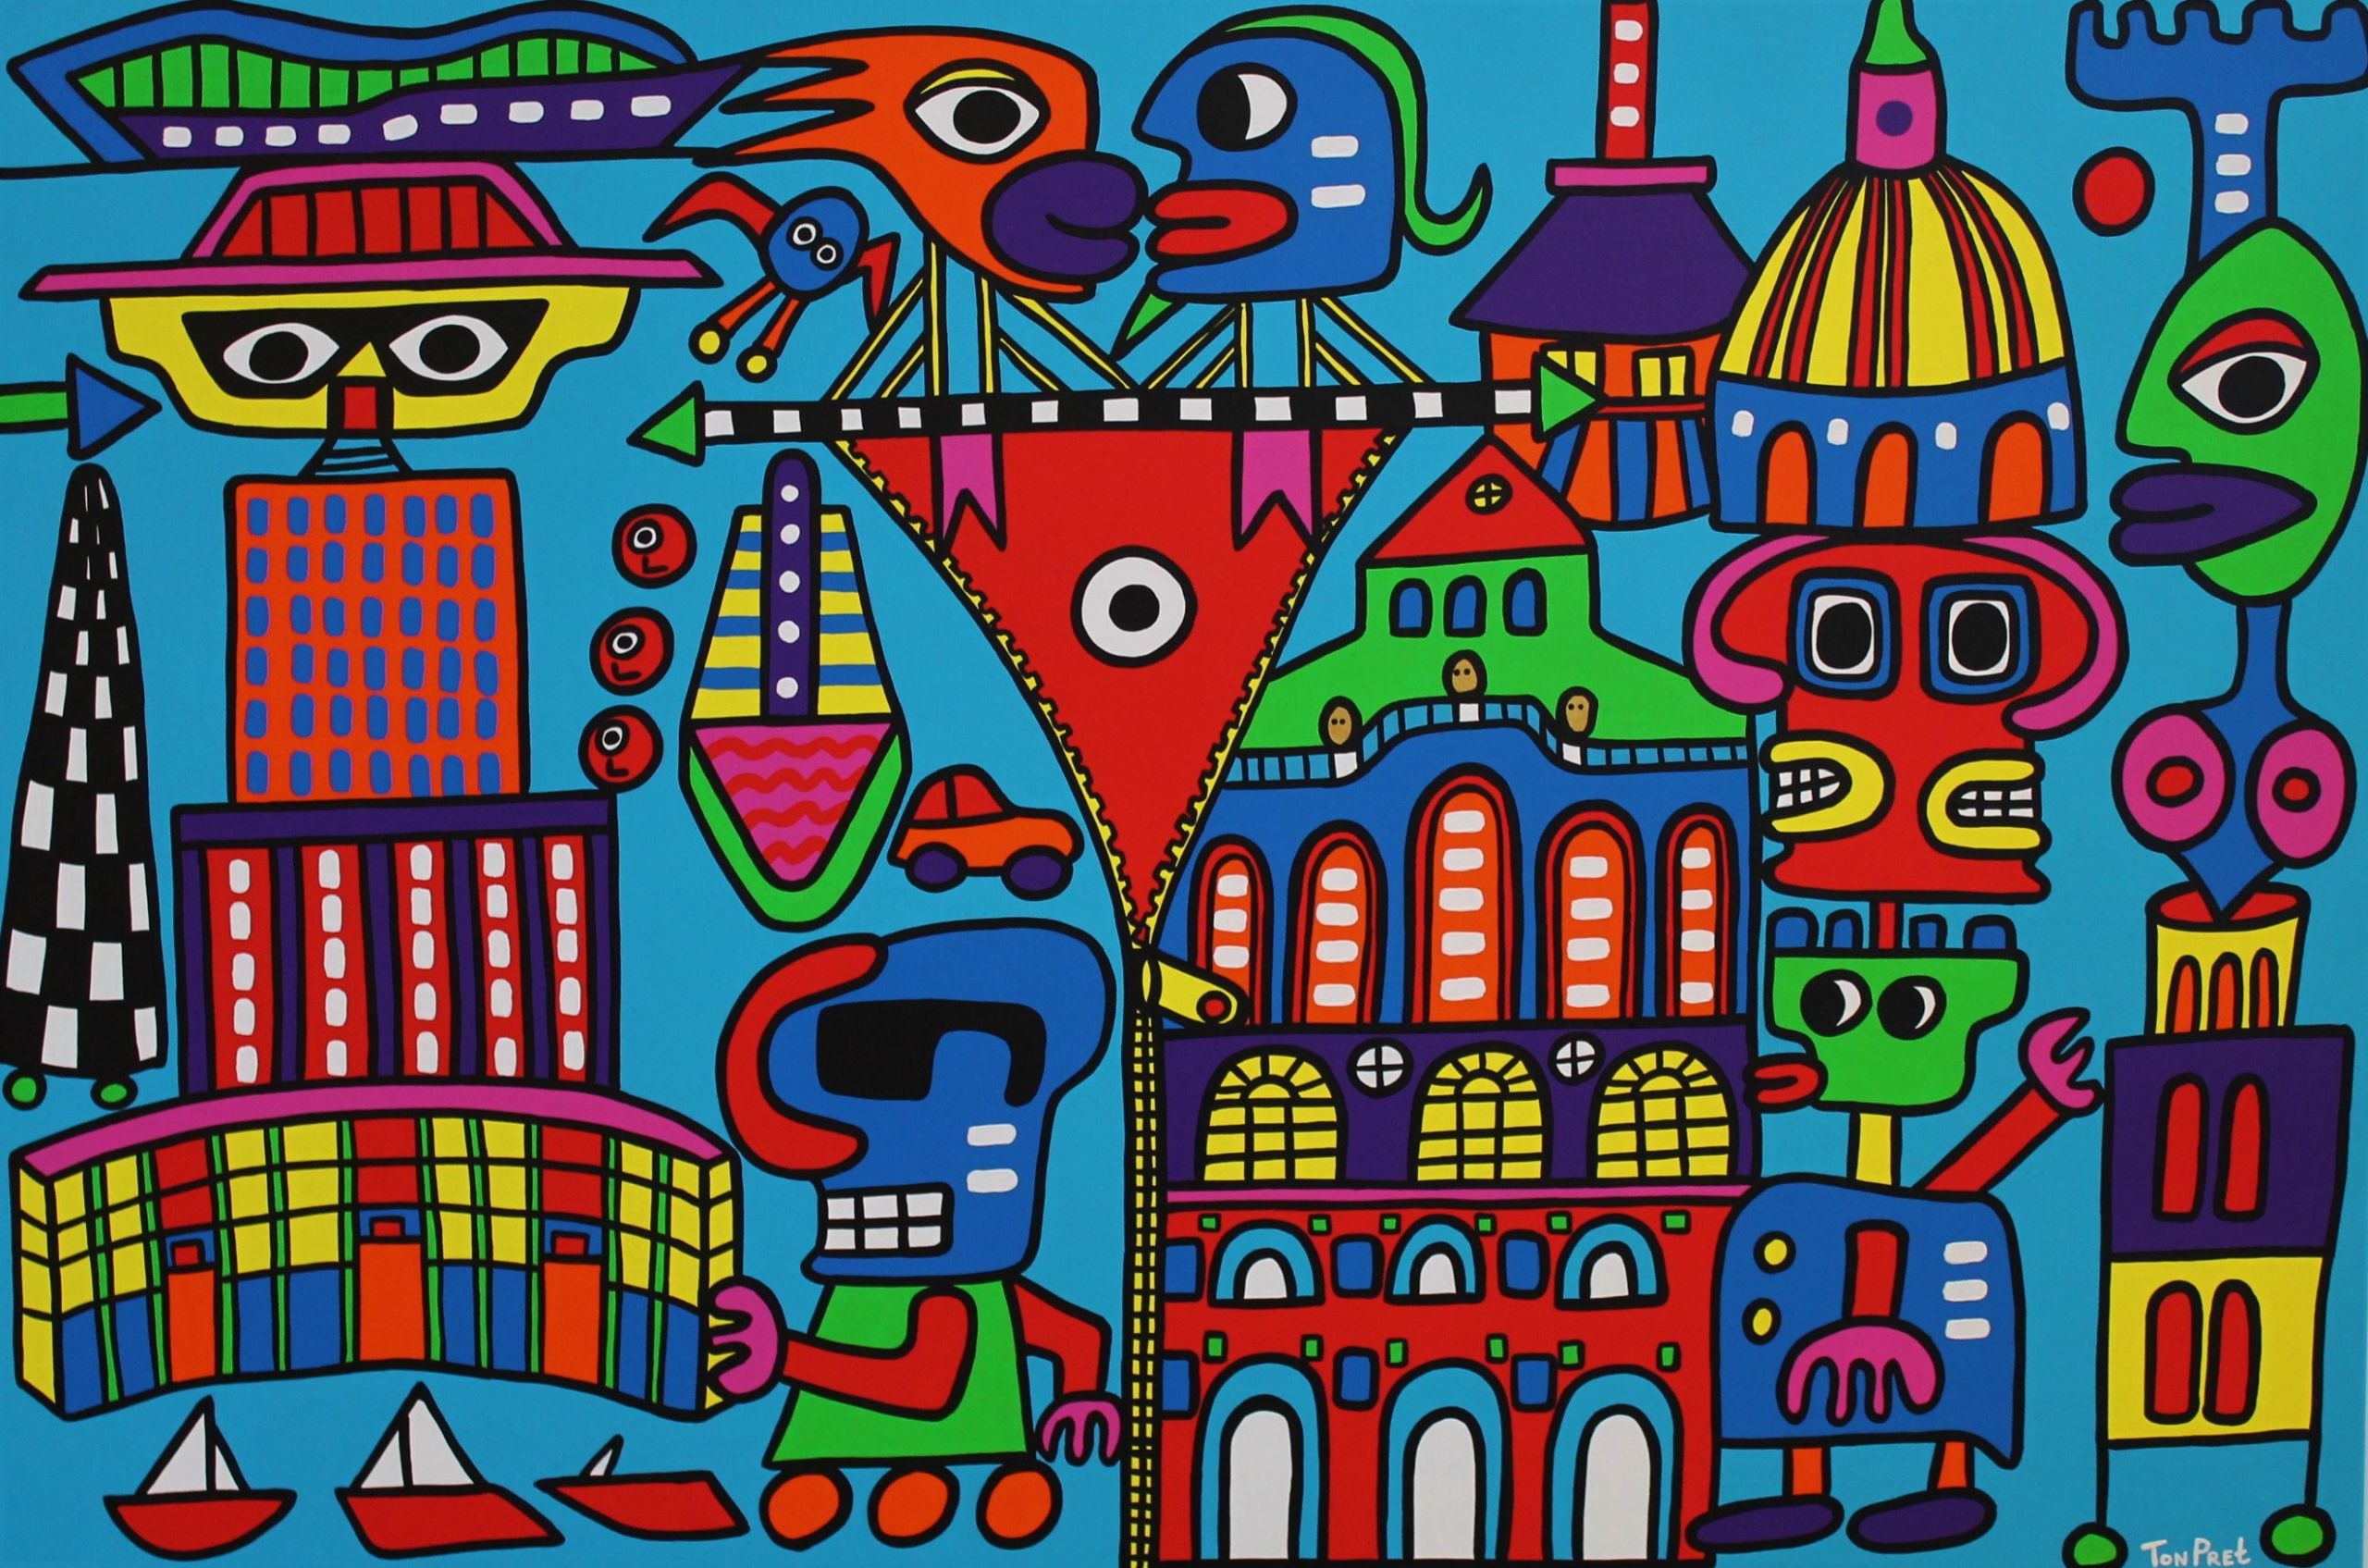 Old and new Italian architecture connected by a giant zipper 150cm x 100cm acrylic on canvas SOLD